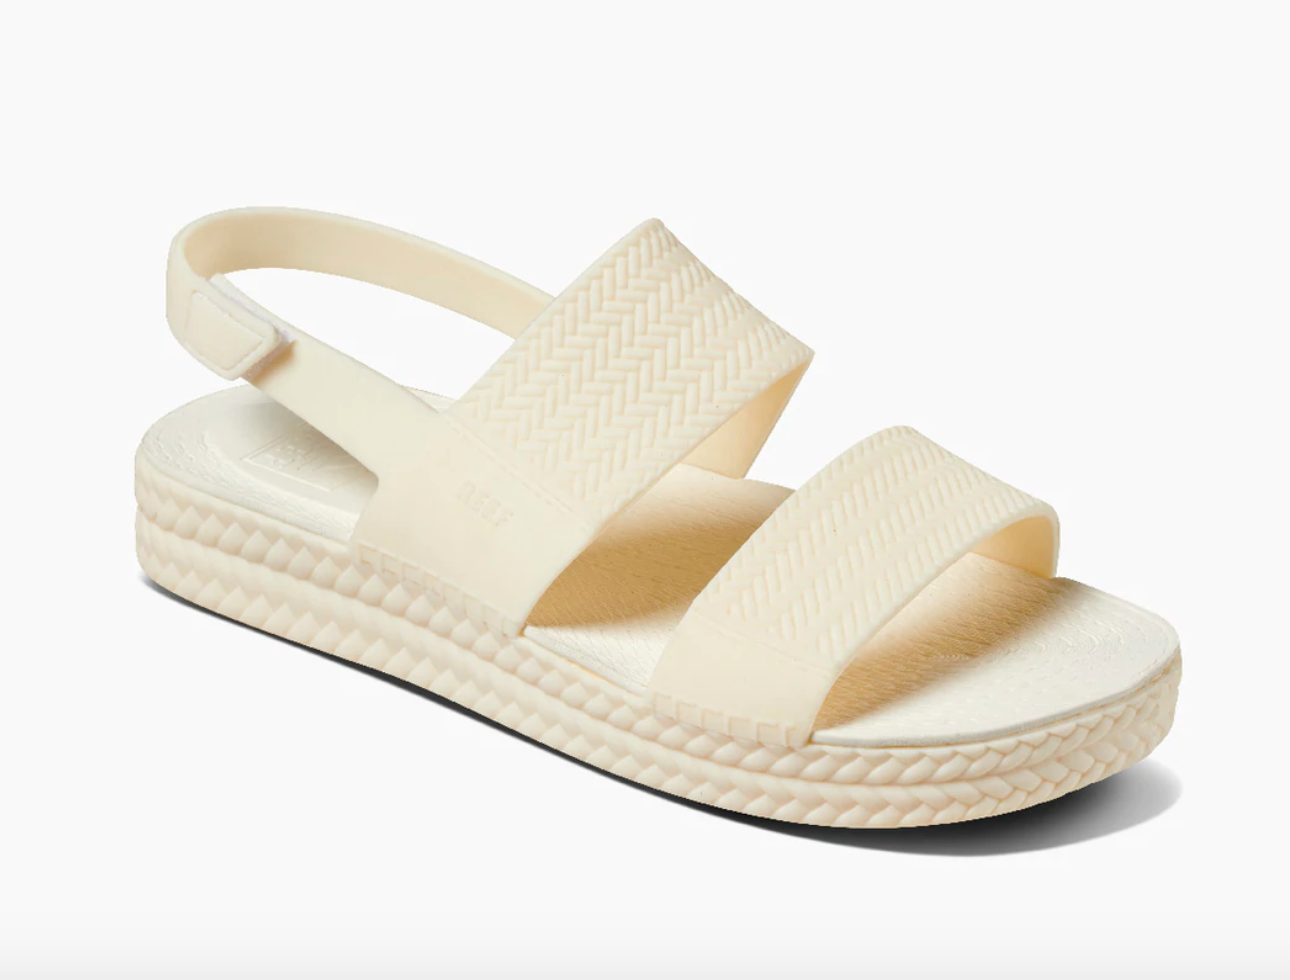 The white platform sandals with two front straps and a velcro heel strap